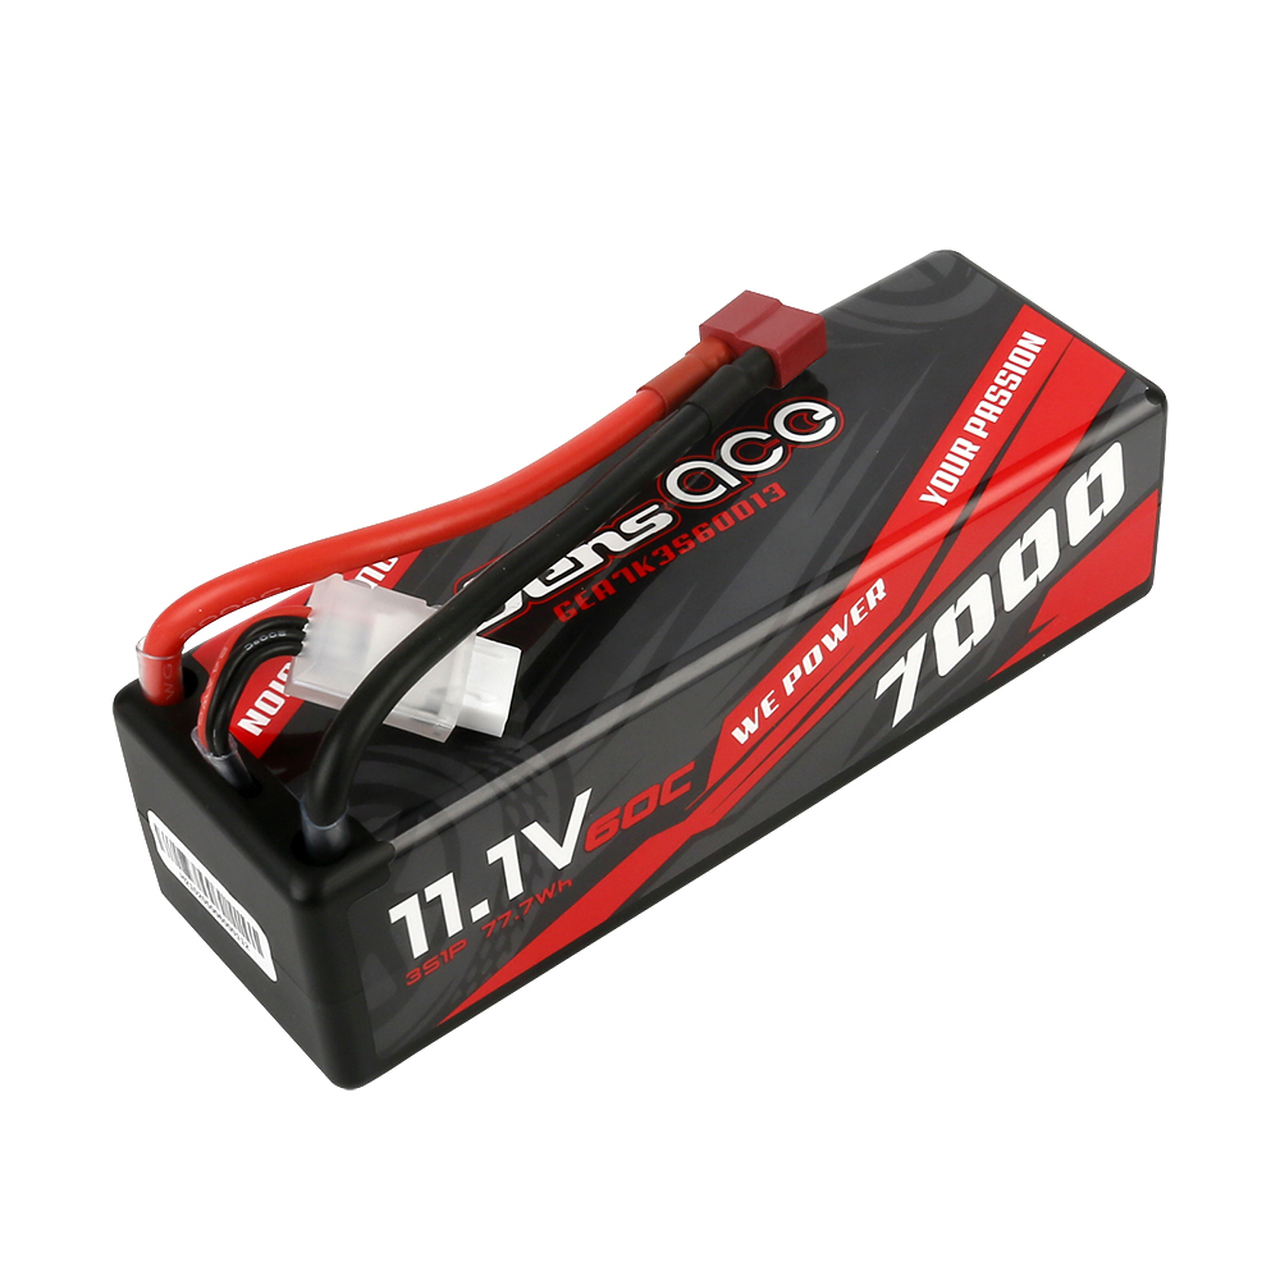 Gens ace 7000mAh 11.1V 3S1P 60C HardCase Lipo Battery Pack #13 with Deans Plug